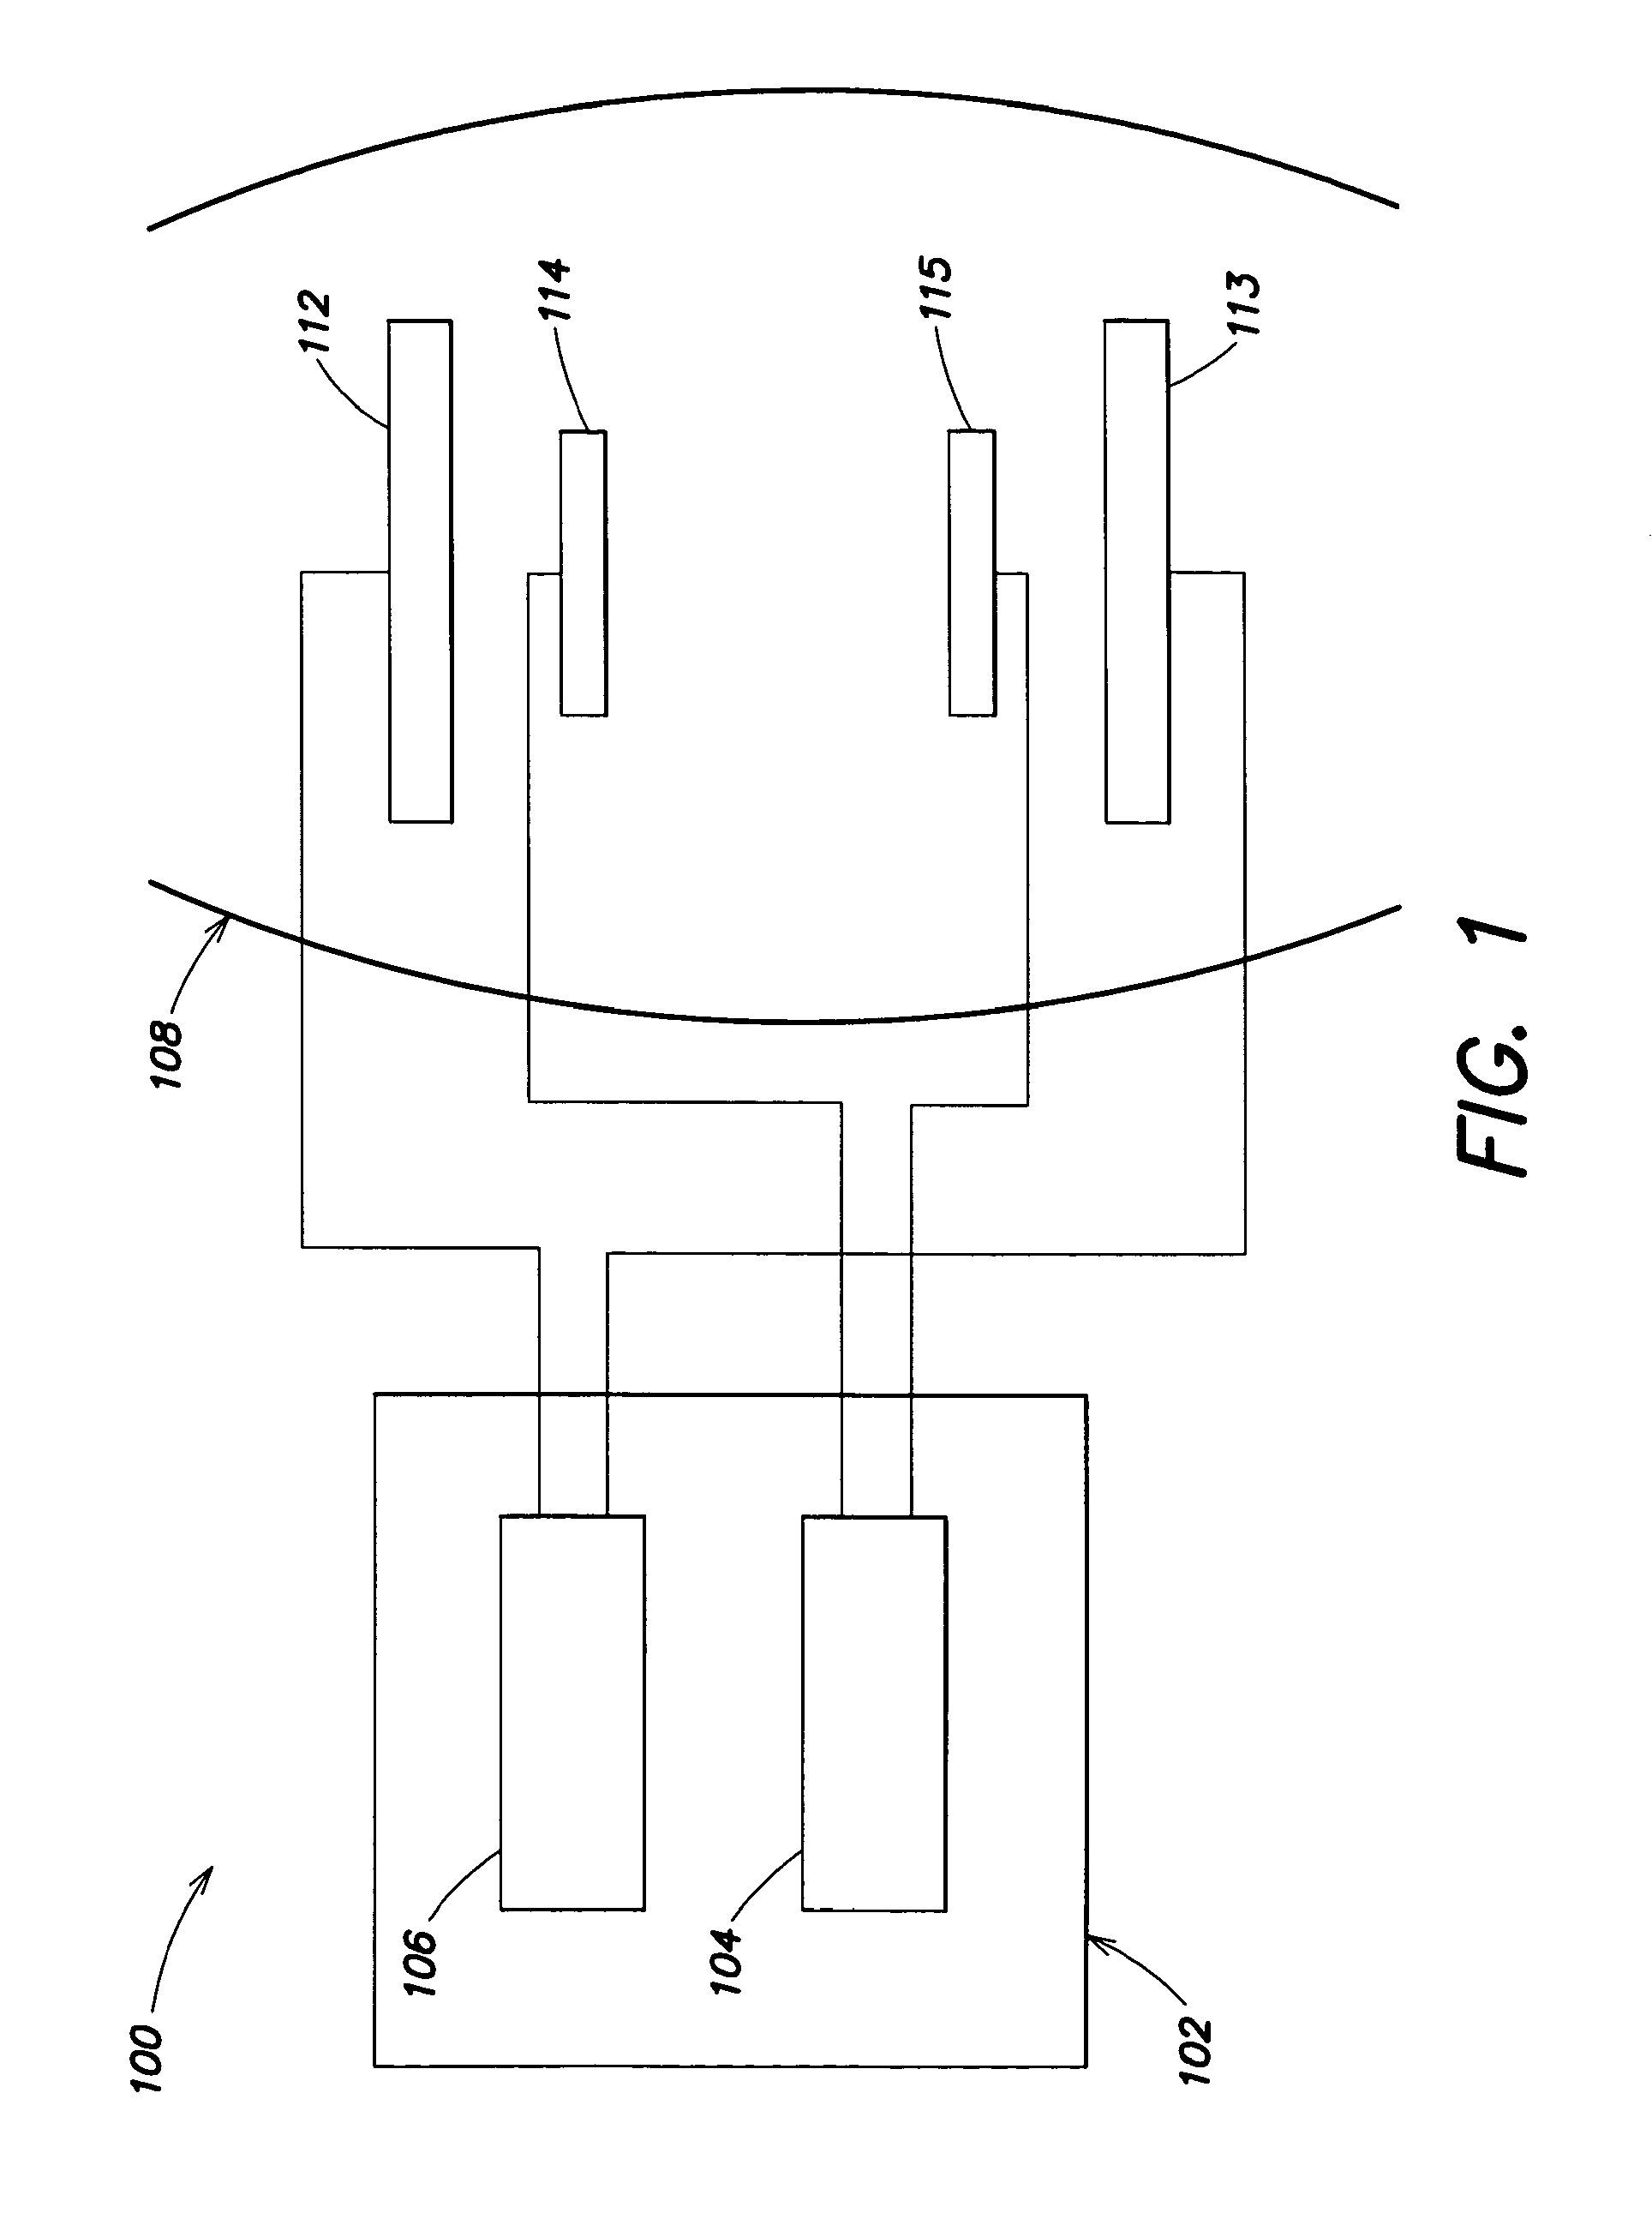 Hand-held device for electrical impedance myography